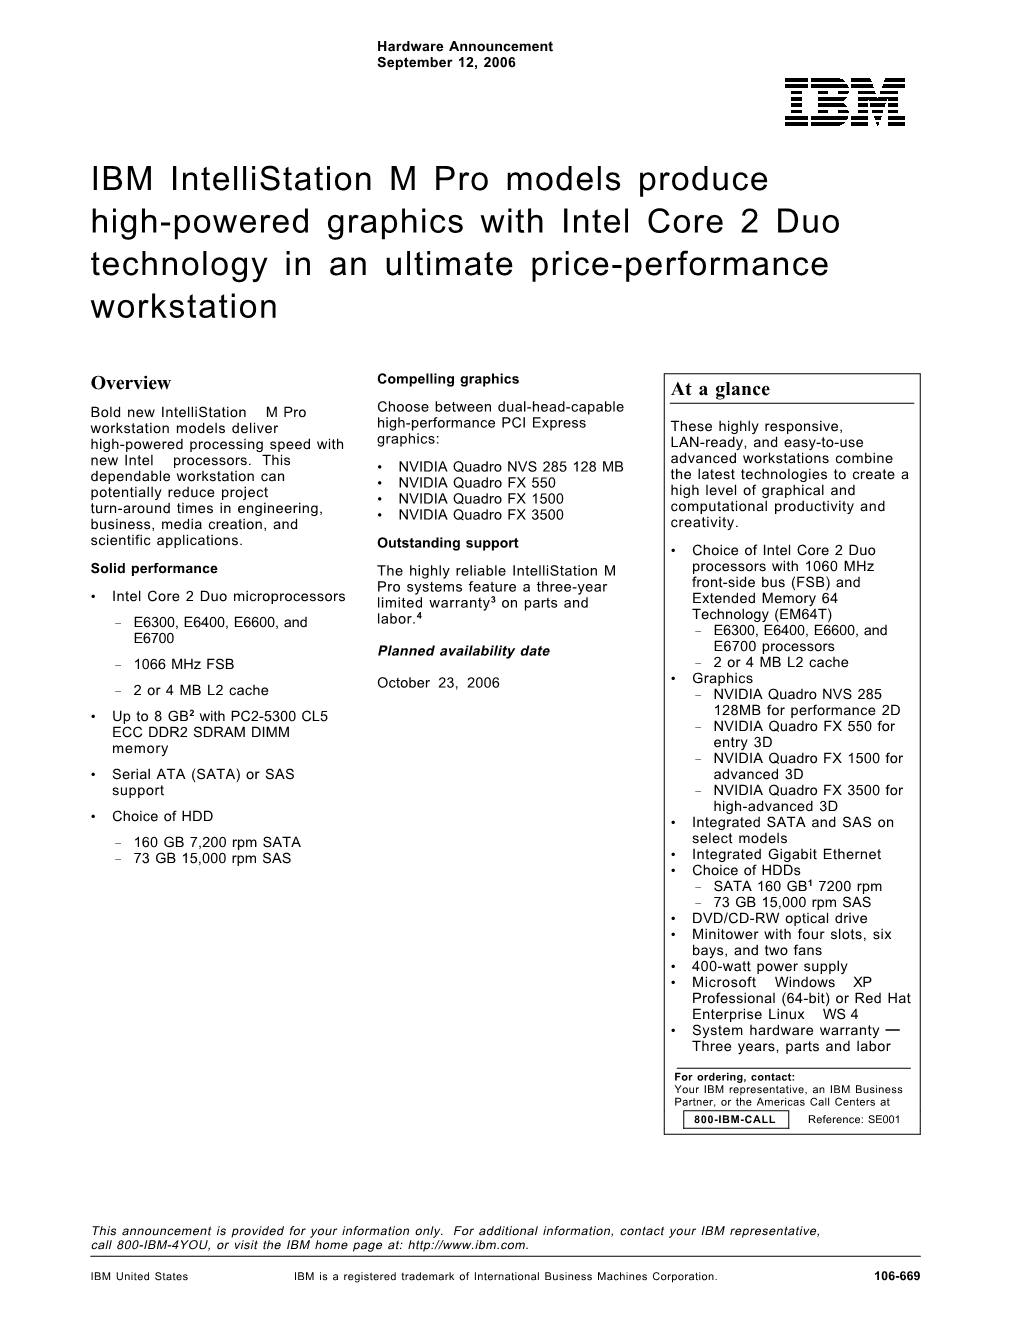 IBM Intellistation M Pro Models Produce High-Powered Graphics with Intel Core 2 Duo Technology in an Ultimate Price-Performance Workstation